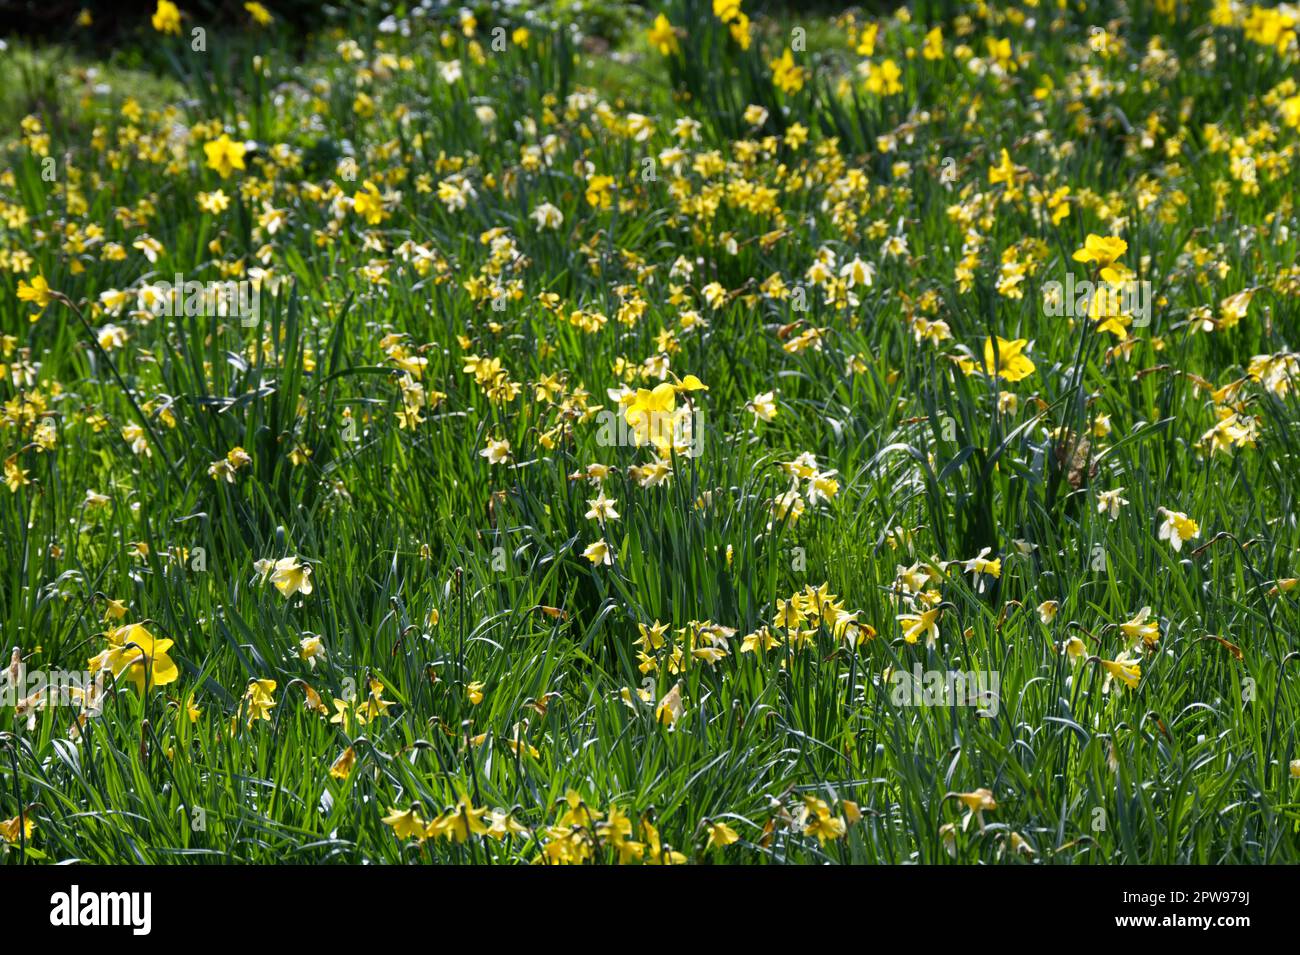 Spring display of mixed daffodils (narcissus) naturalised in grass in UK garden April Stock Photo